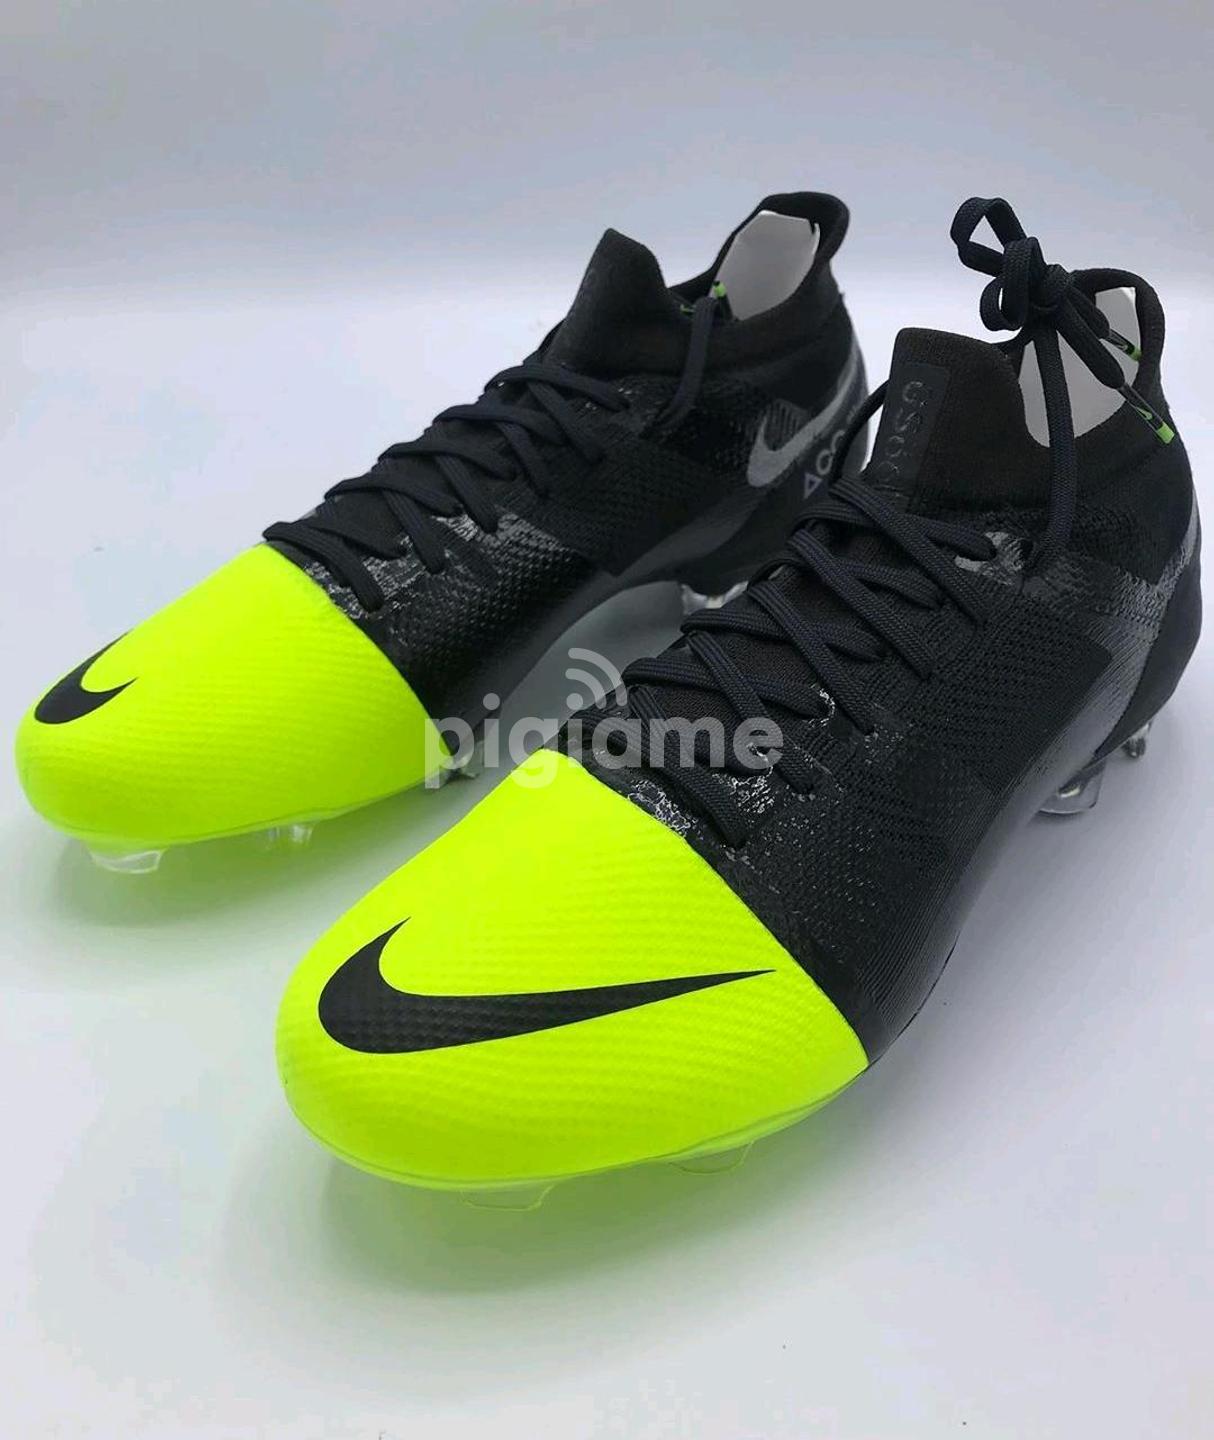 nike mercurial limited edition 218